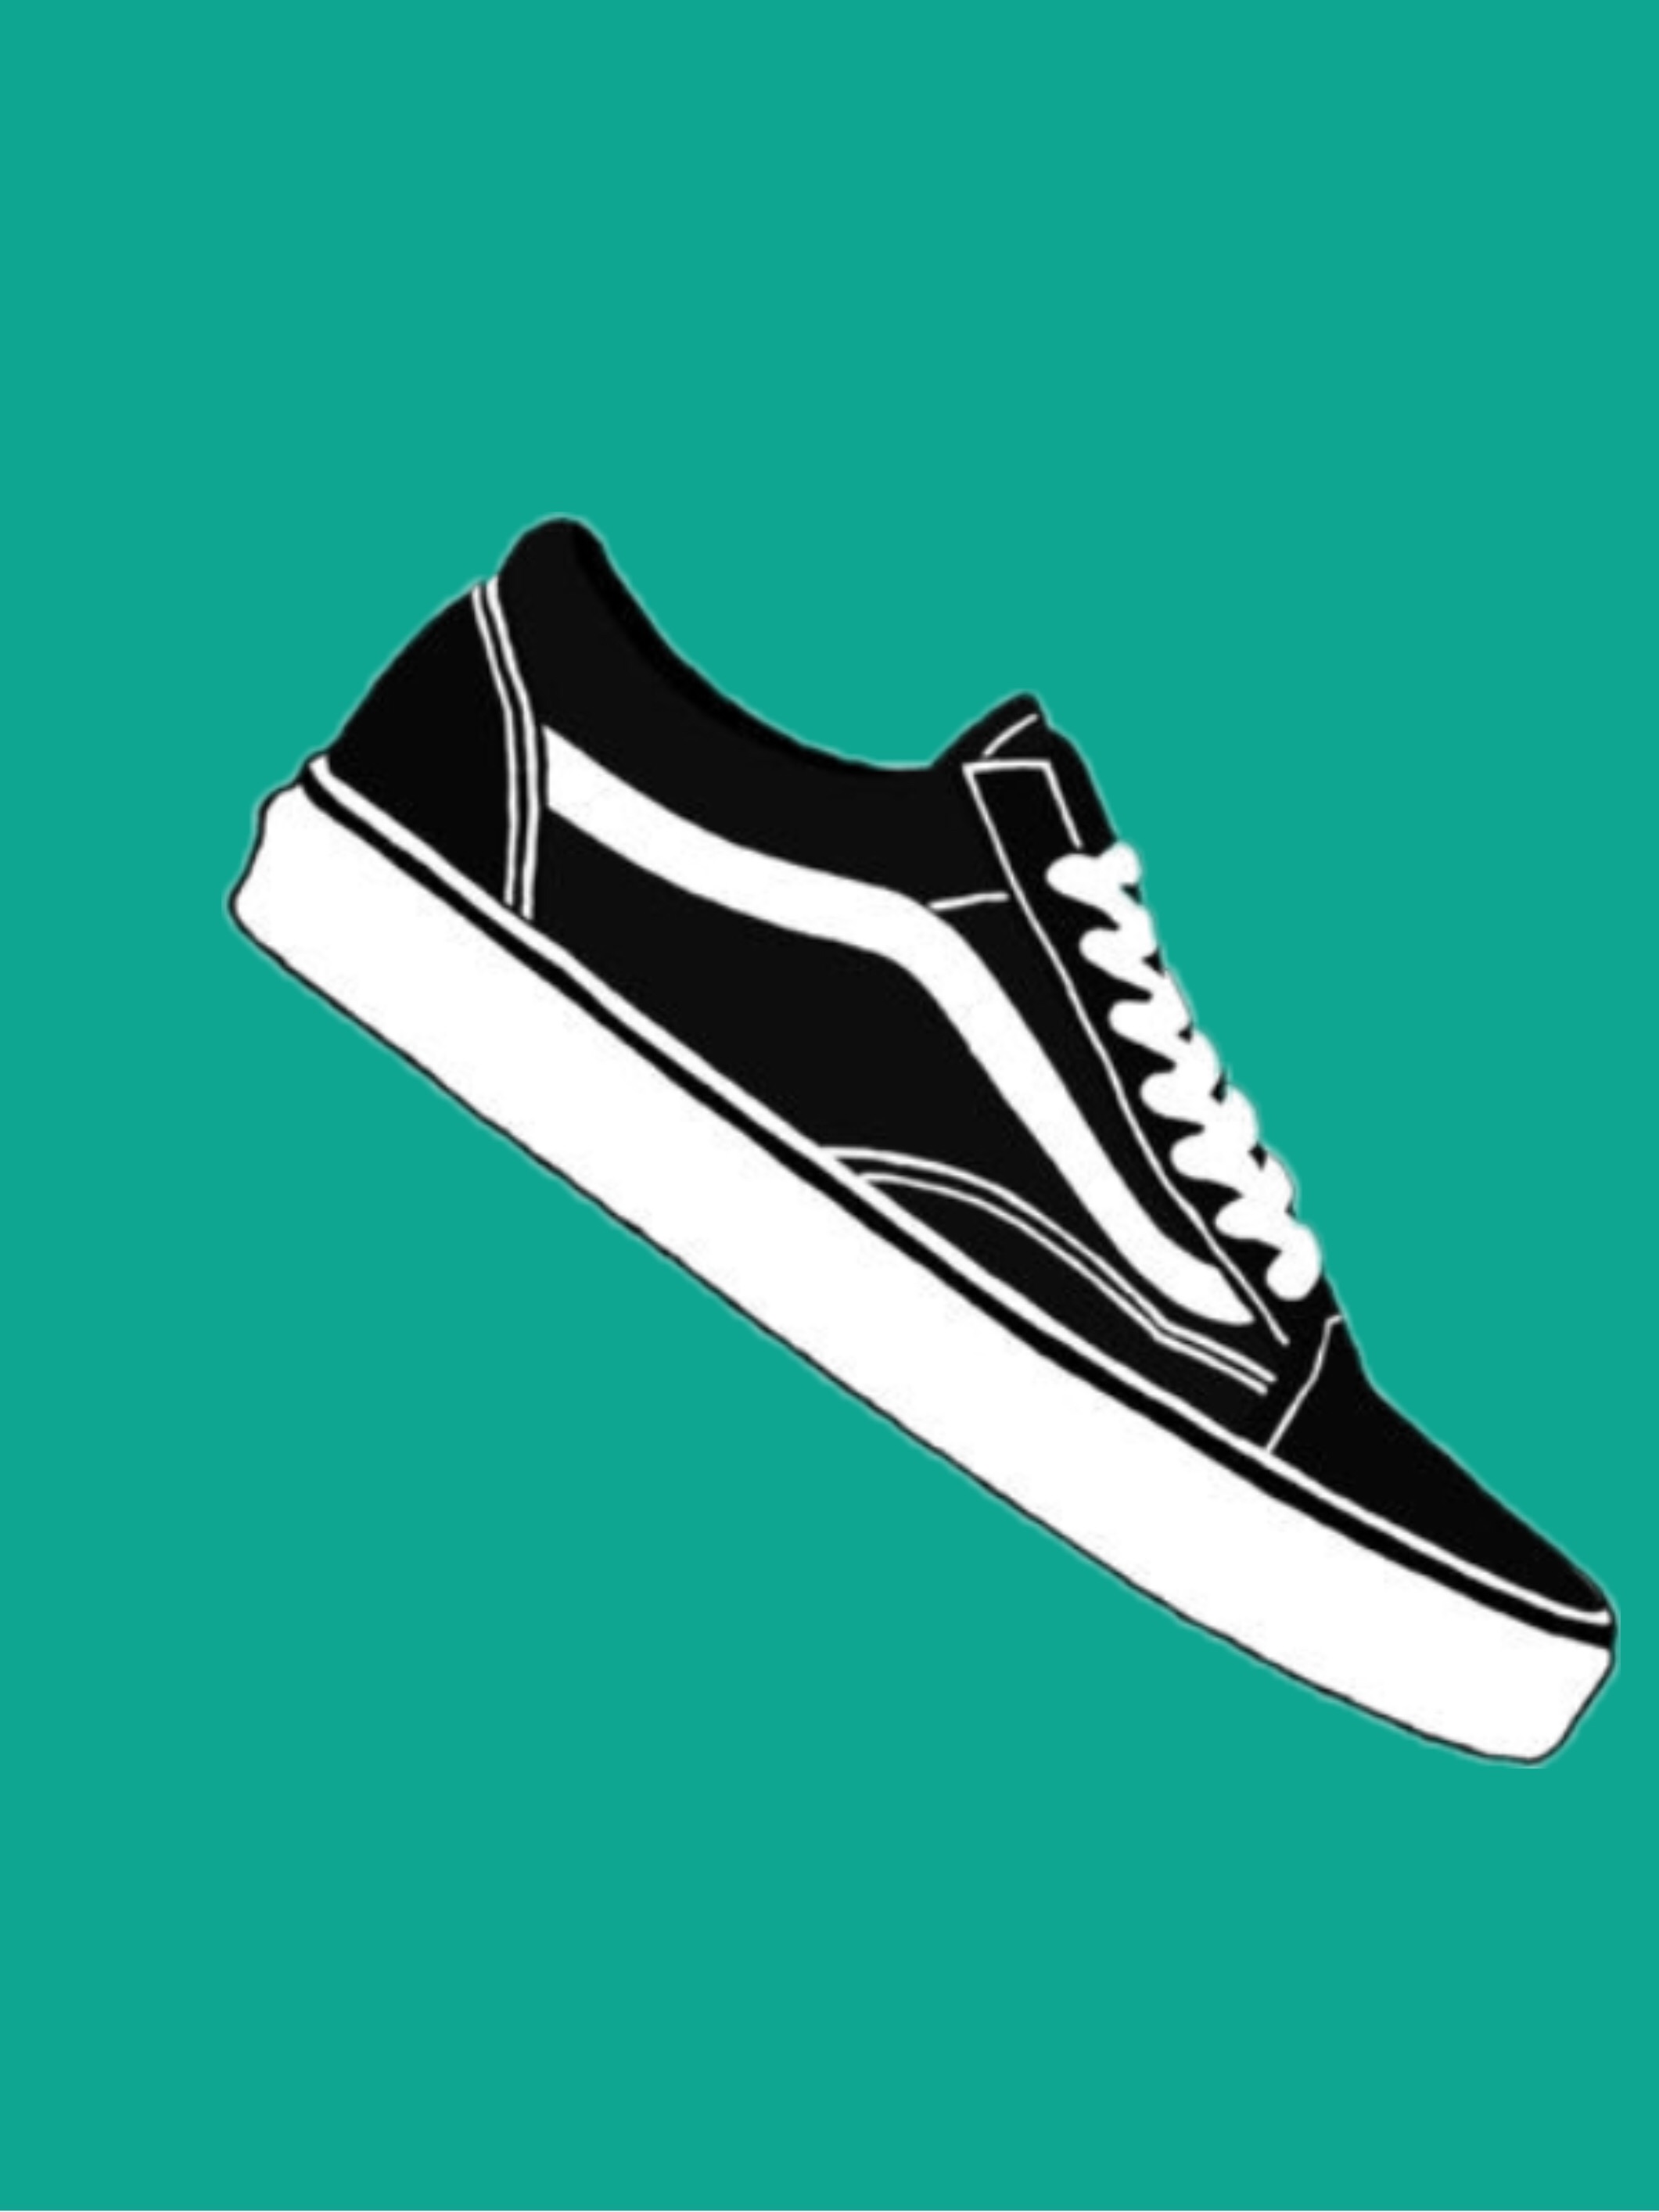 How To Draw Vans Shoes Step By Step - Howto Techno